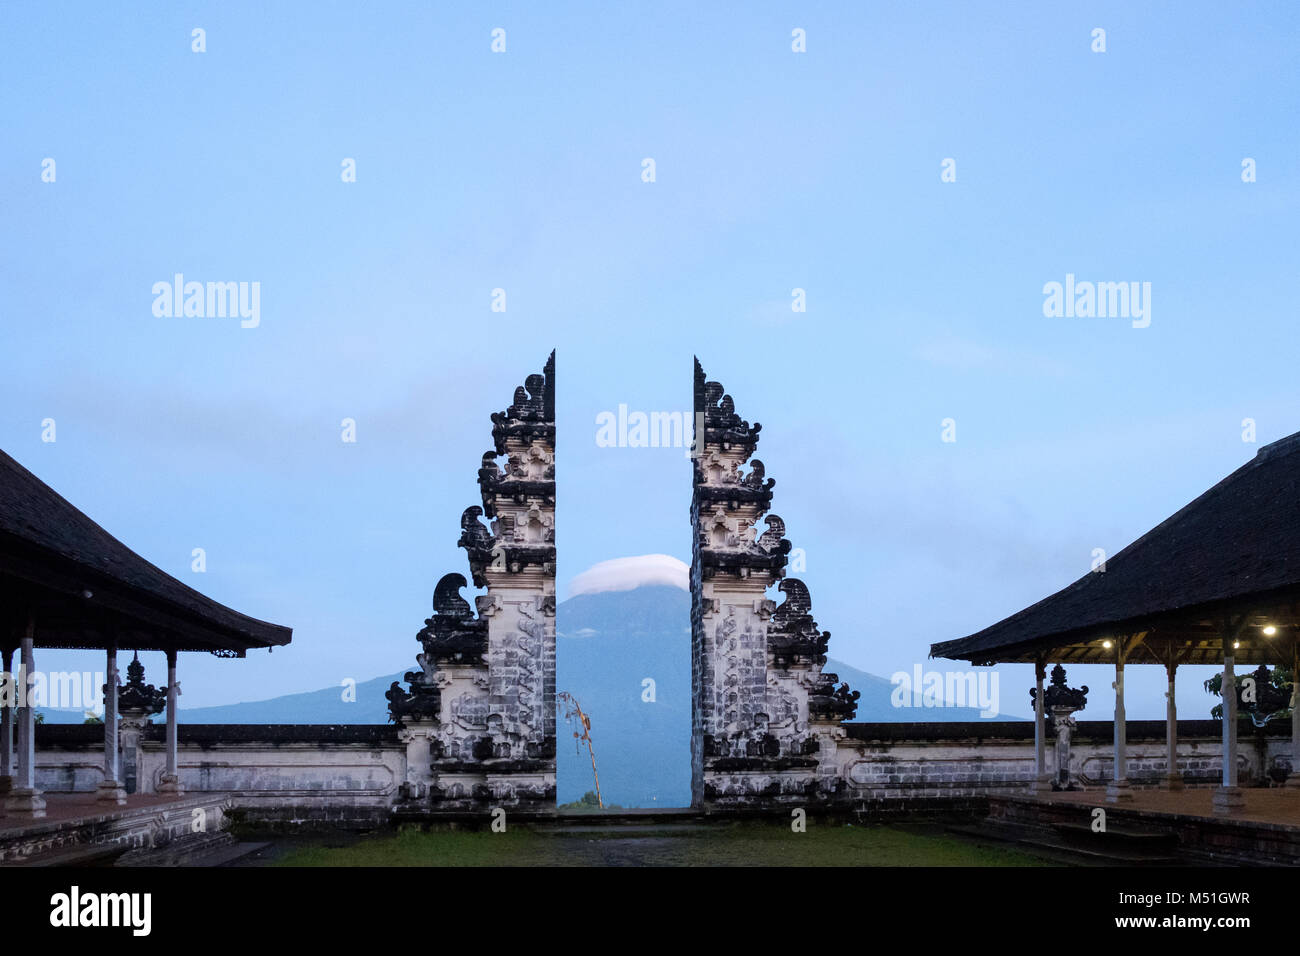 Gunung Agung volcano and 'candi bentar' (a traditional Balinese gate) seen from the outer sanctum at Pura Lempuyang temple, Bali, Indonesia. Stock Photo